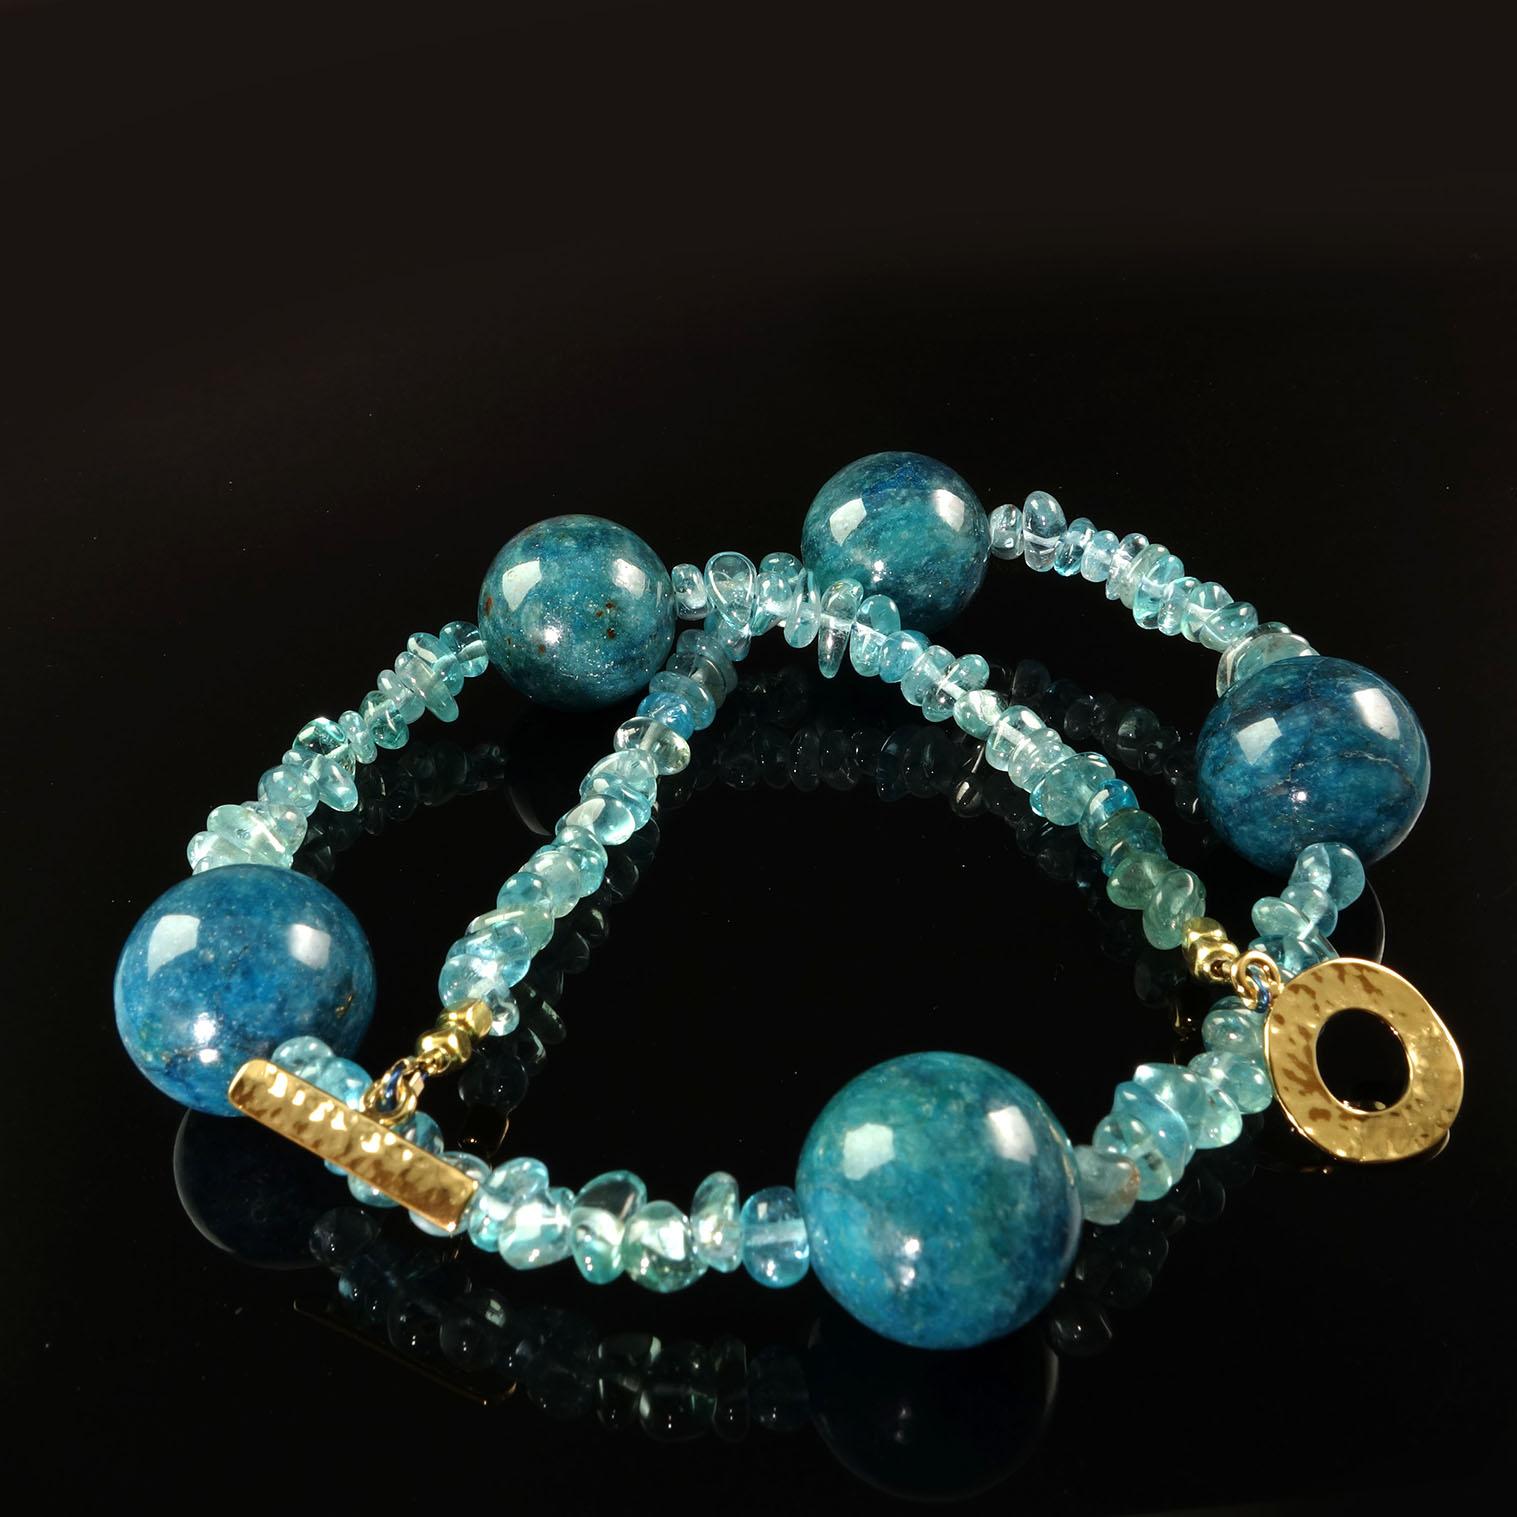 Artisan AJD 18 Inch Large Teal Color Apatite Spheres Mixed with Tumbled Apatite Necklace For Sale